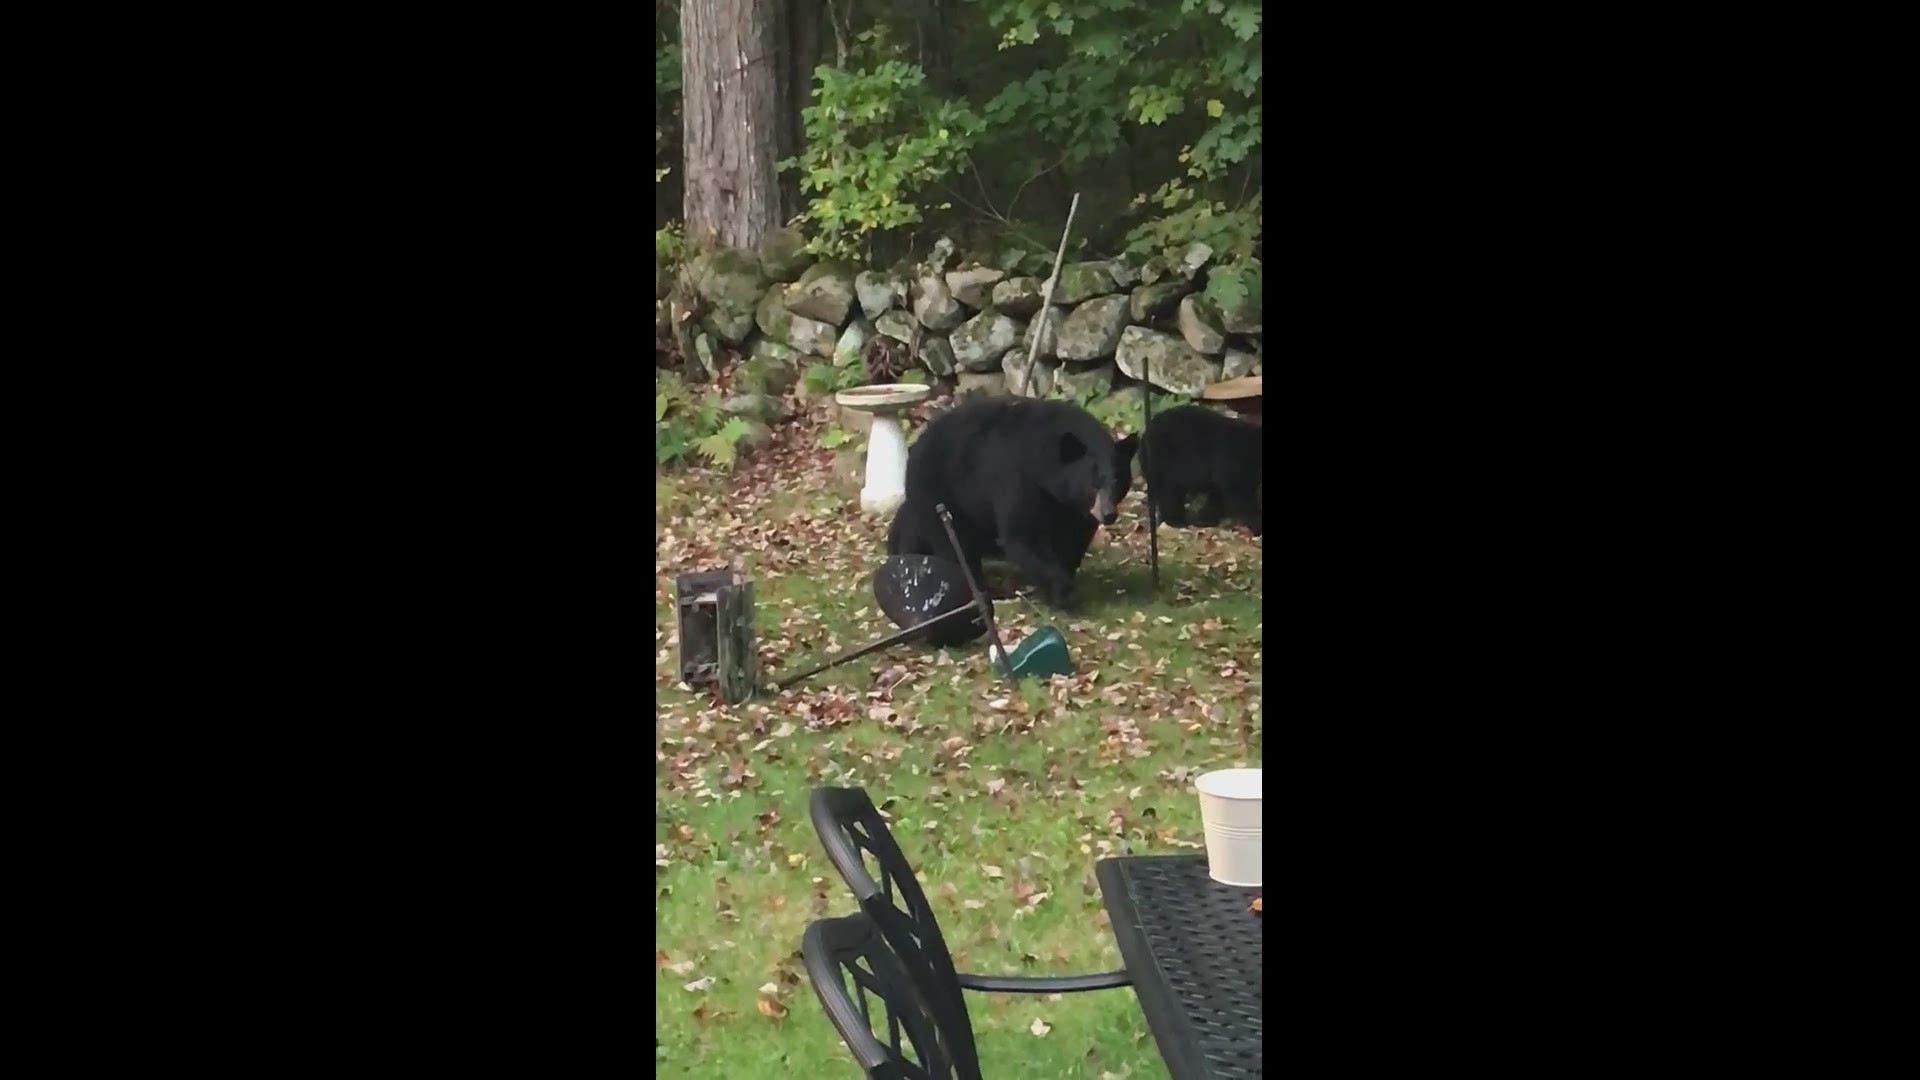 A couple in Wells say a family of hungry bears spent 45 minutes in their backyard Sunday morning brunching on birdseed.